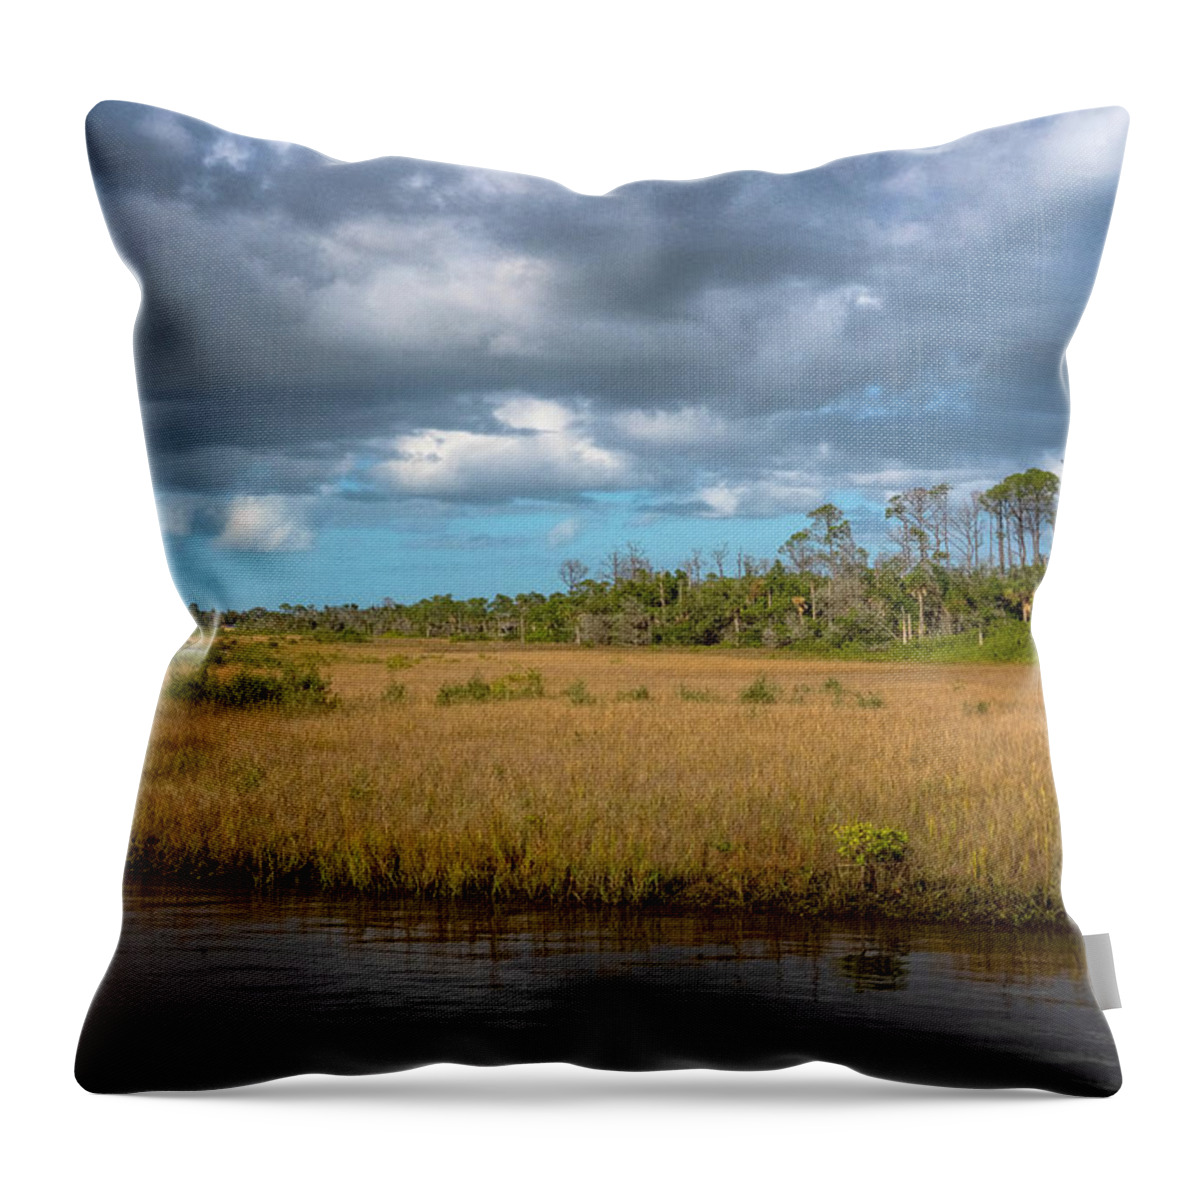 Barberville Roadside Yard Art And Produce Throw Pillow featuring the photograph Spruce Creek Park by Tom Singleton